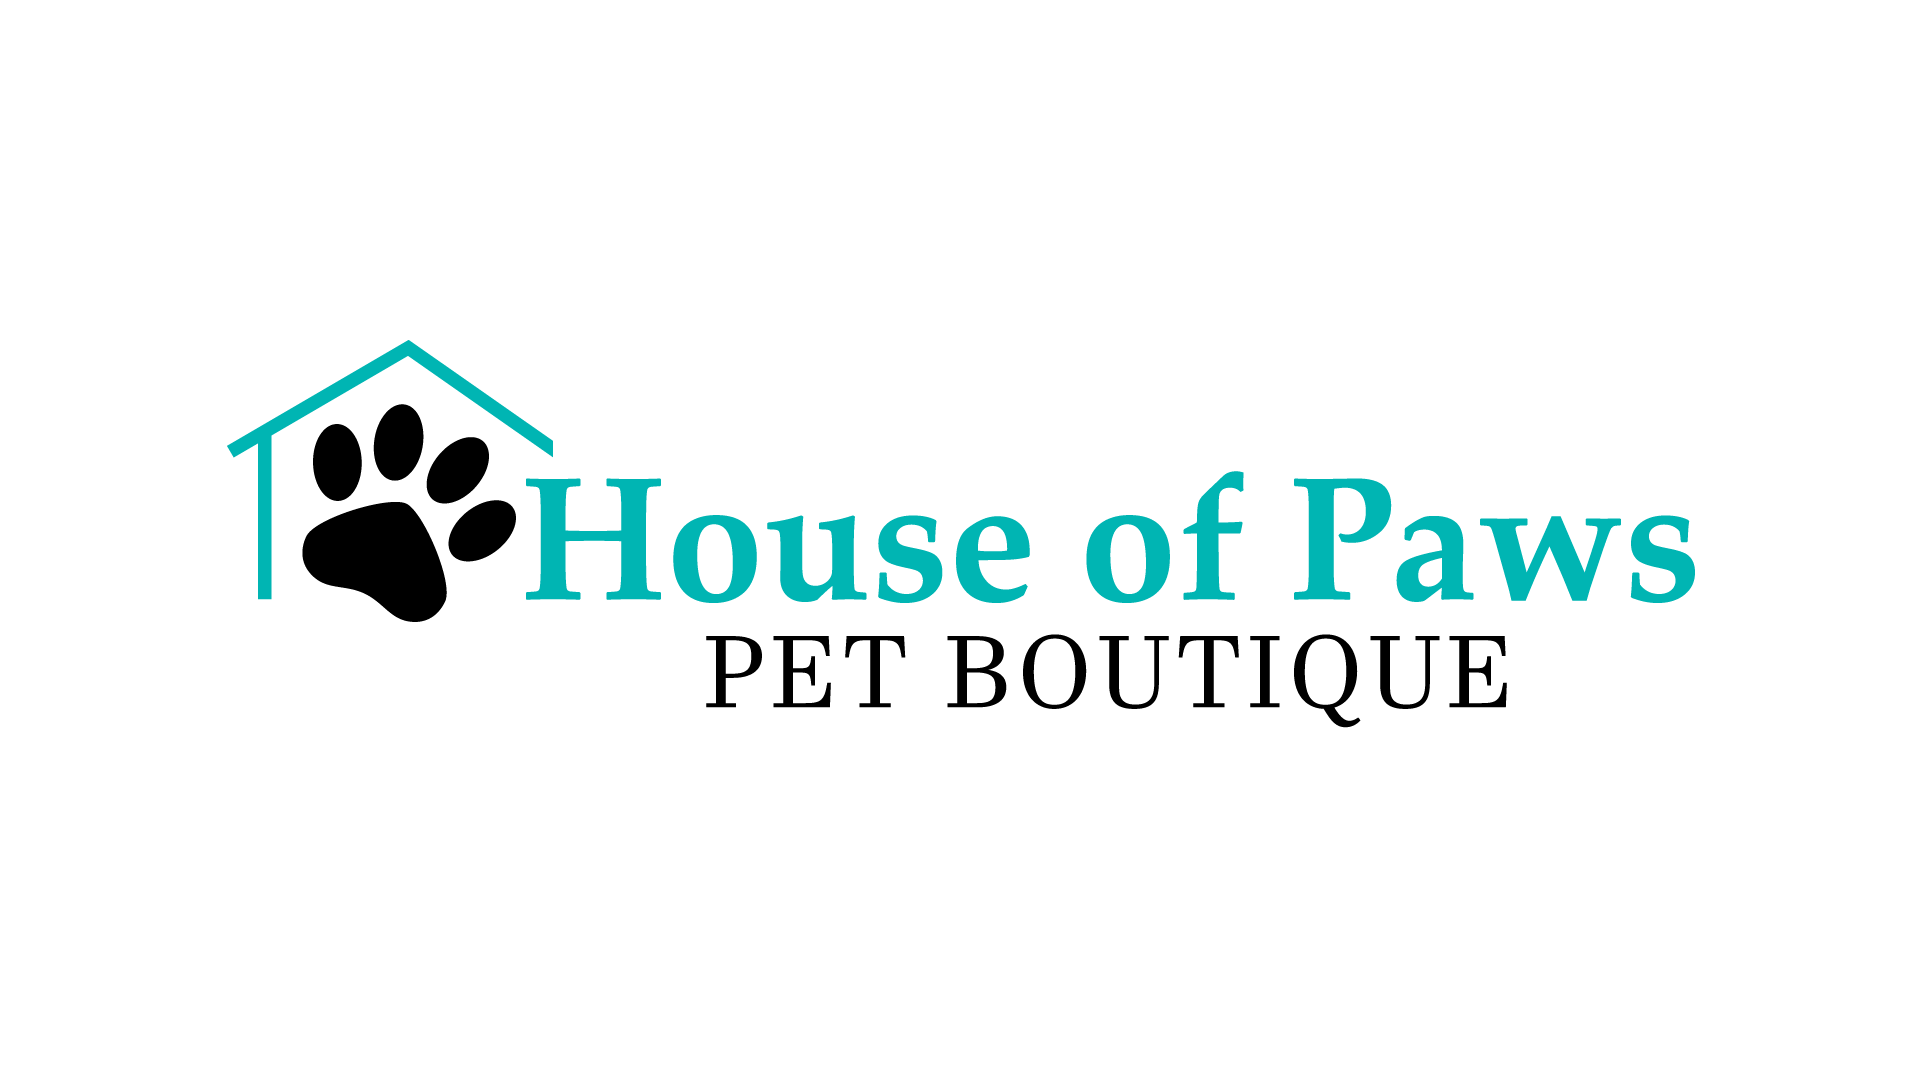 house of paws